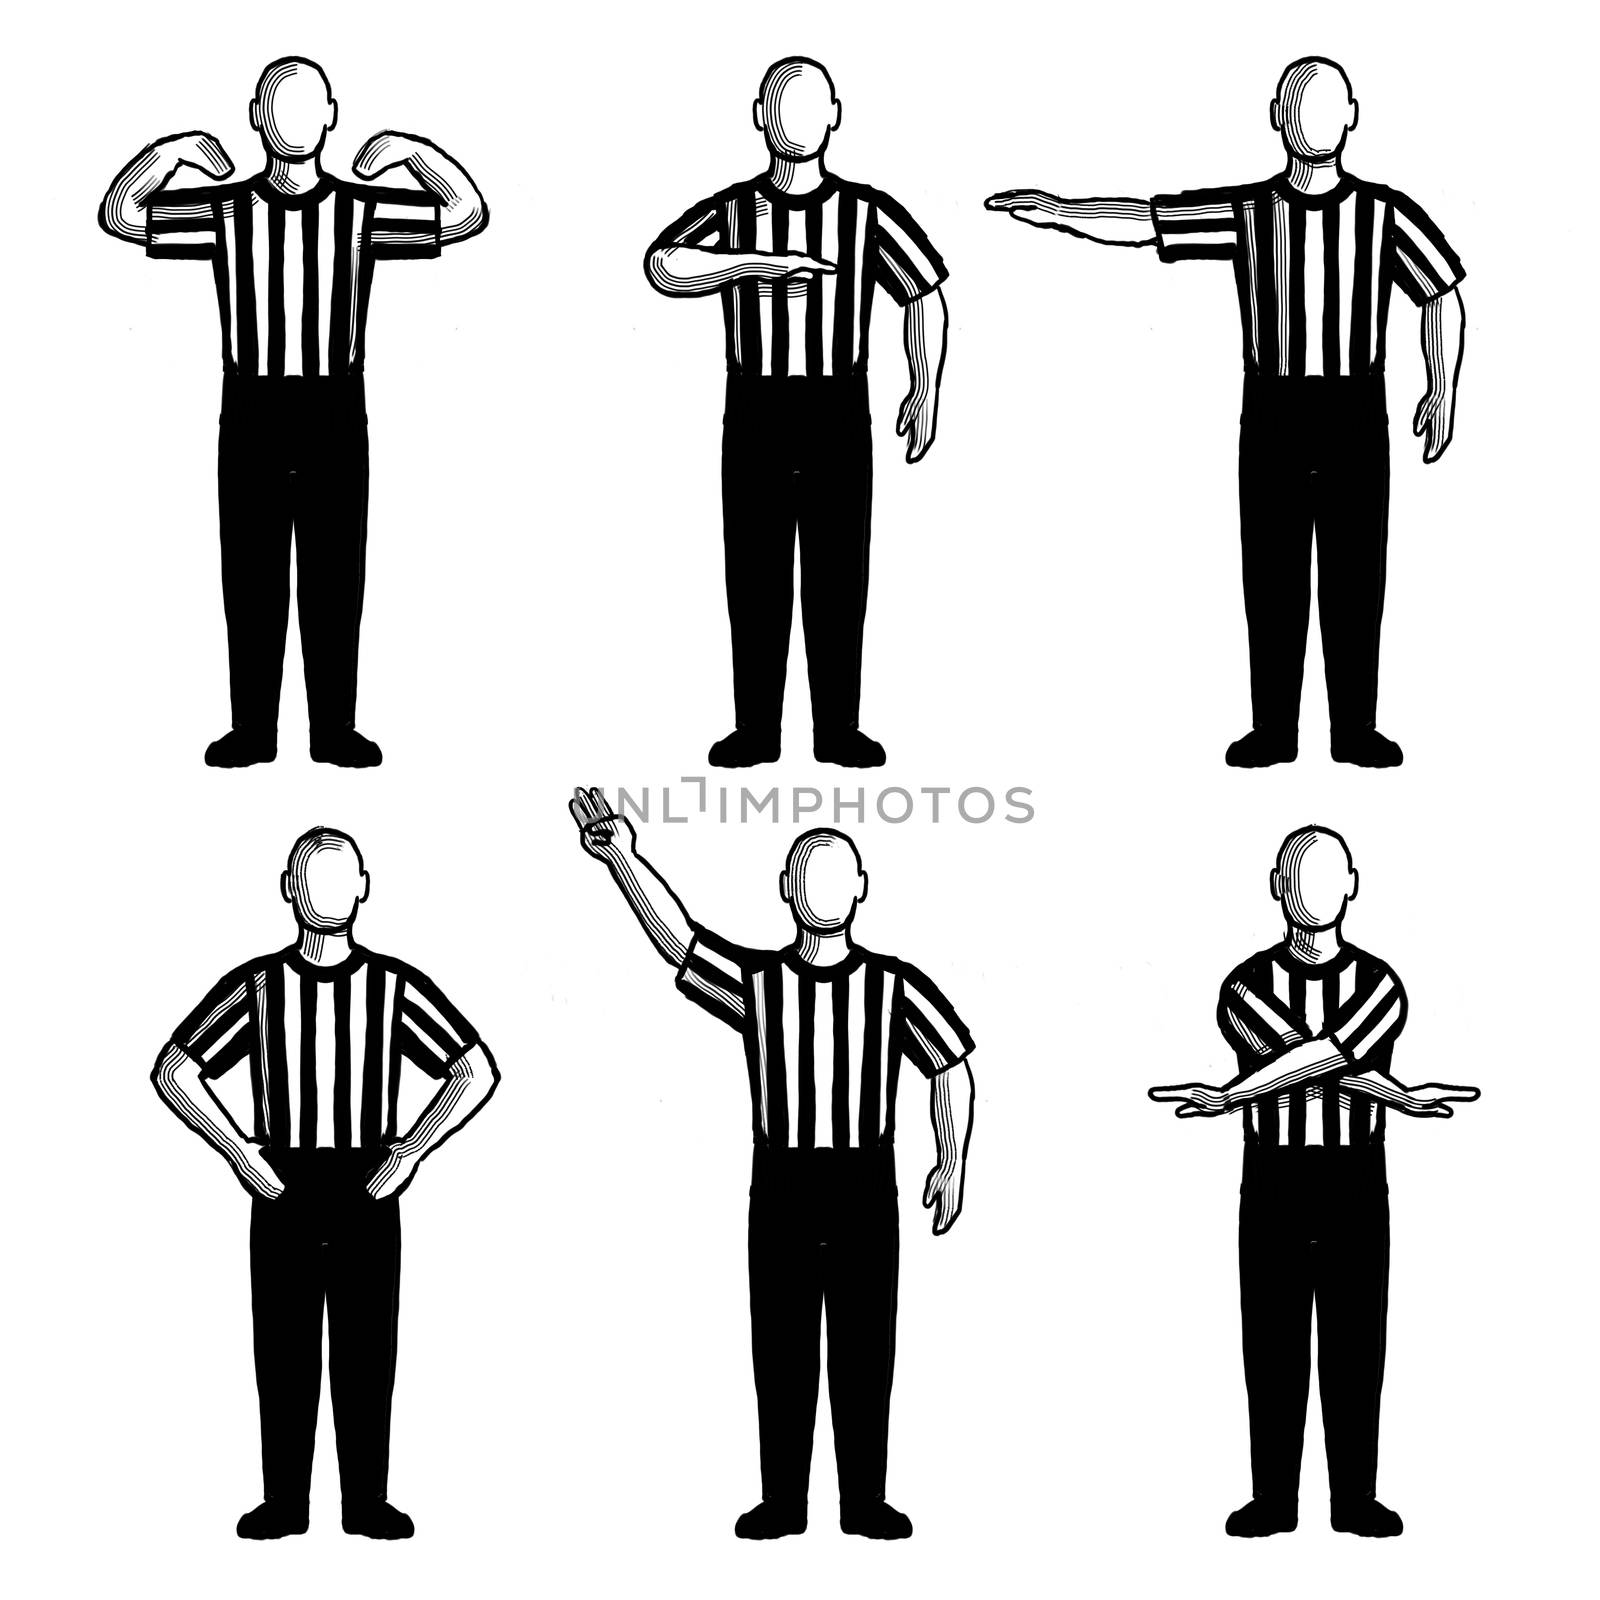 Retro style collection set of drawing illustration showing a basketball referee or official with different hand signals on isolated background done black and white.
